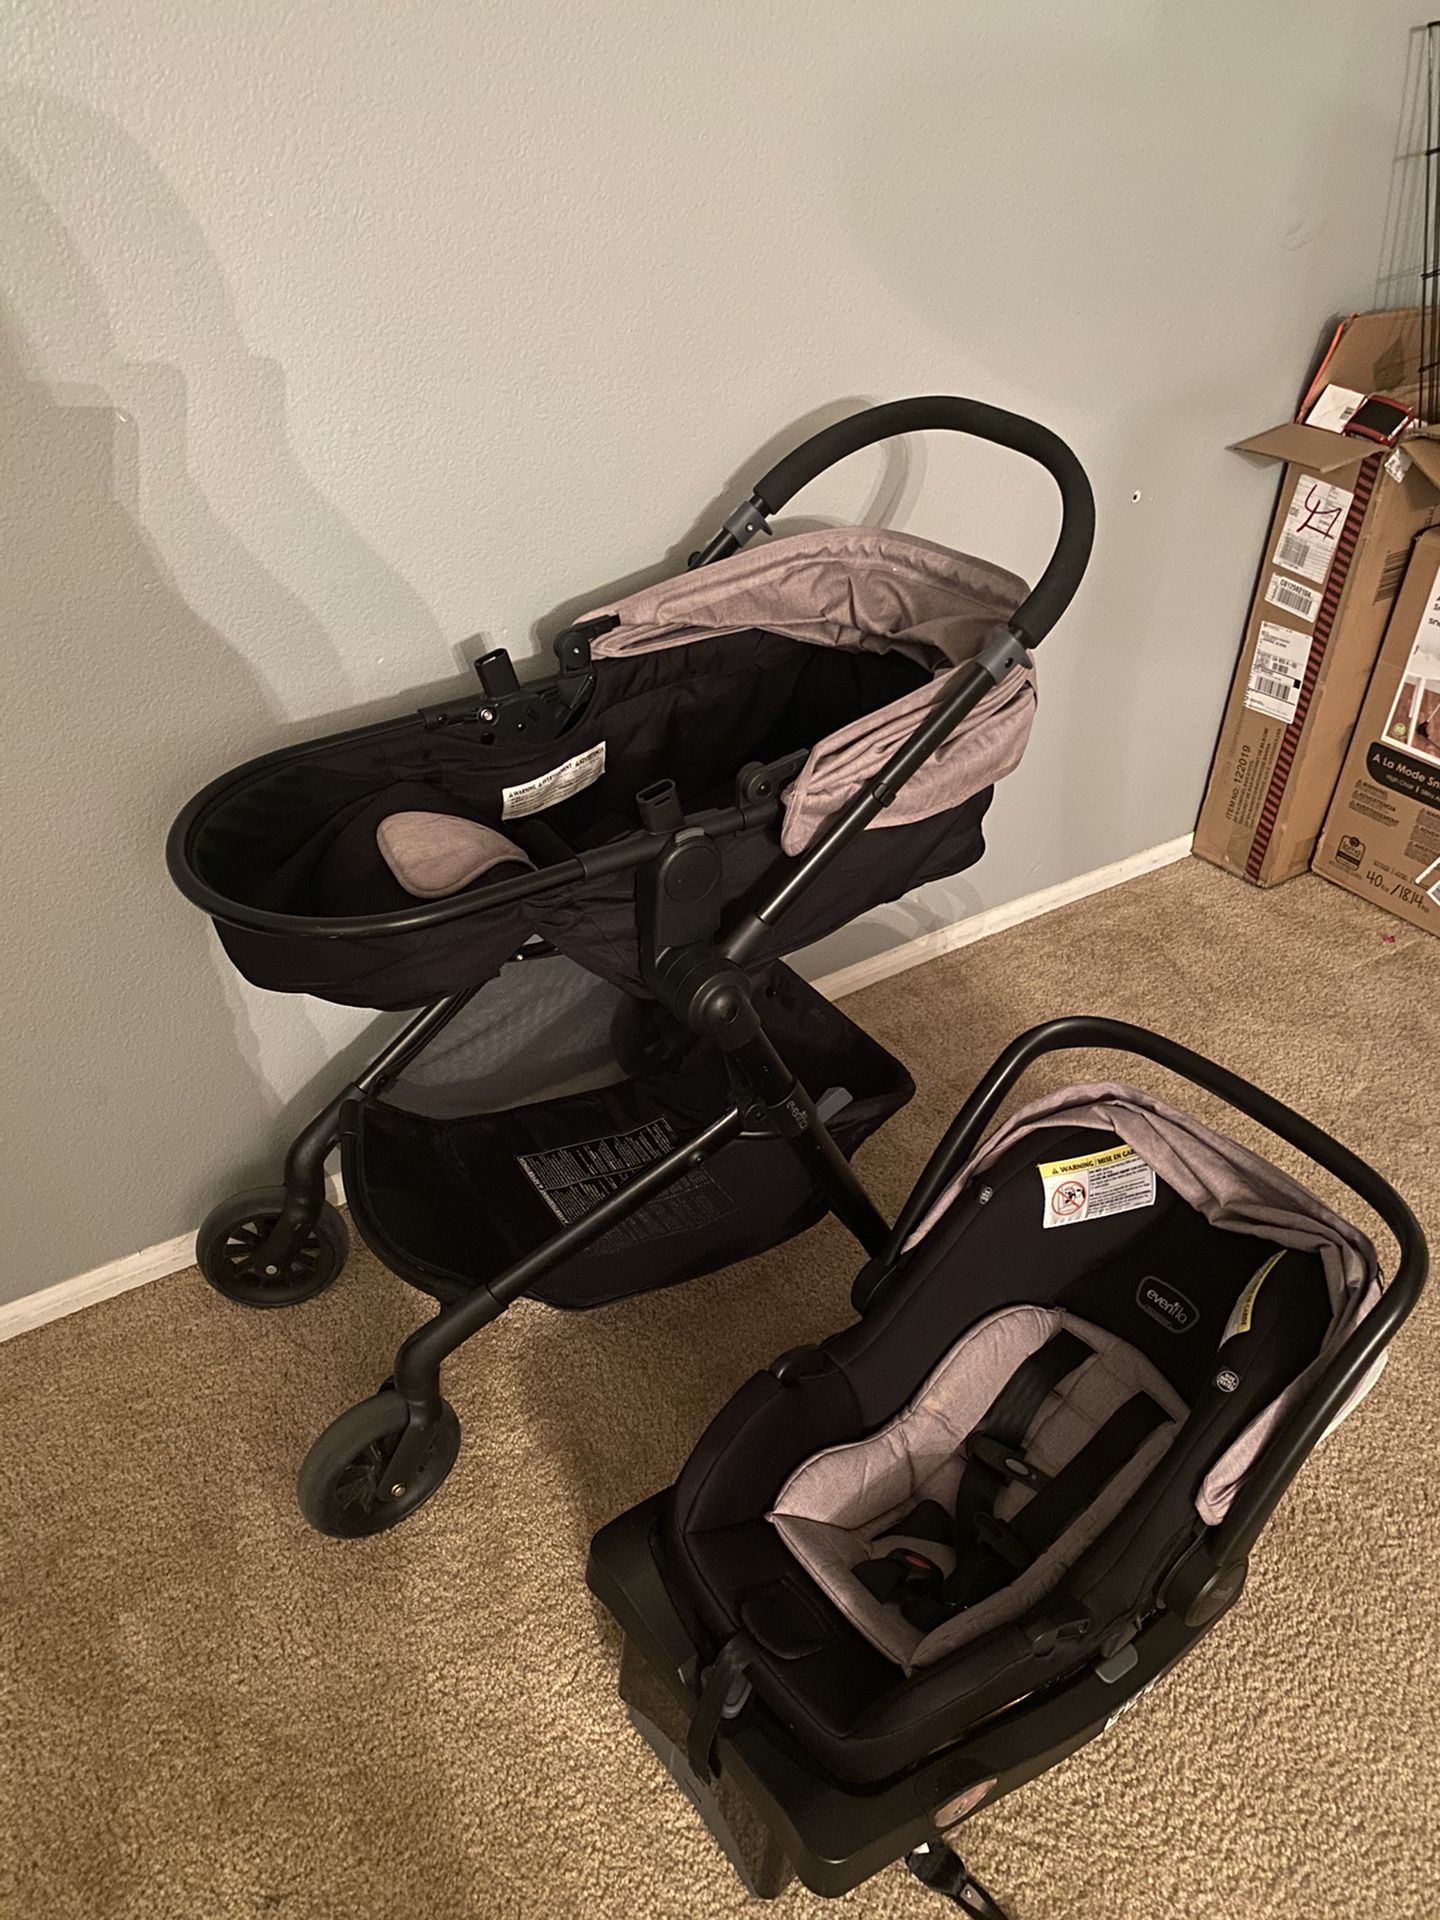 Evenflo car seat and stroller